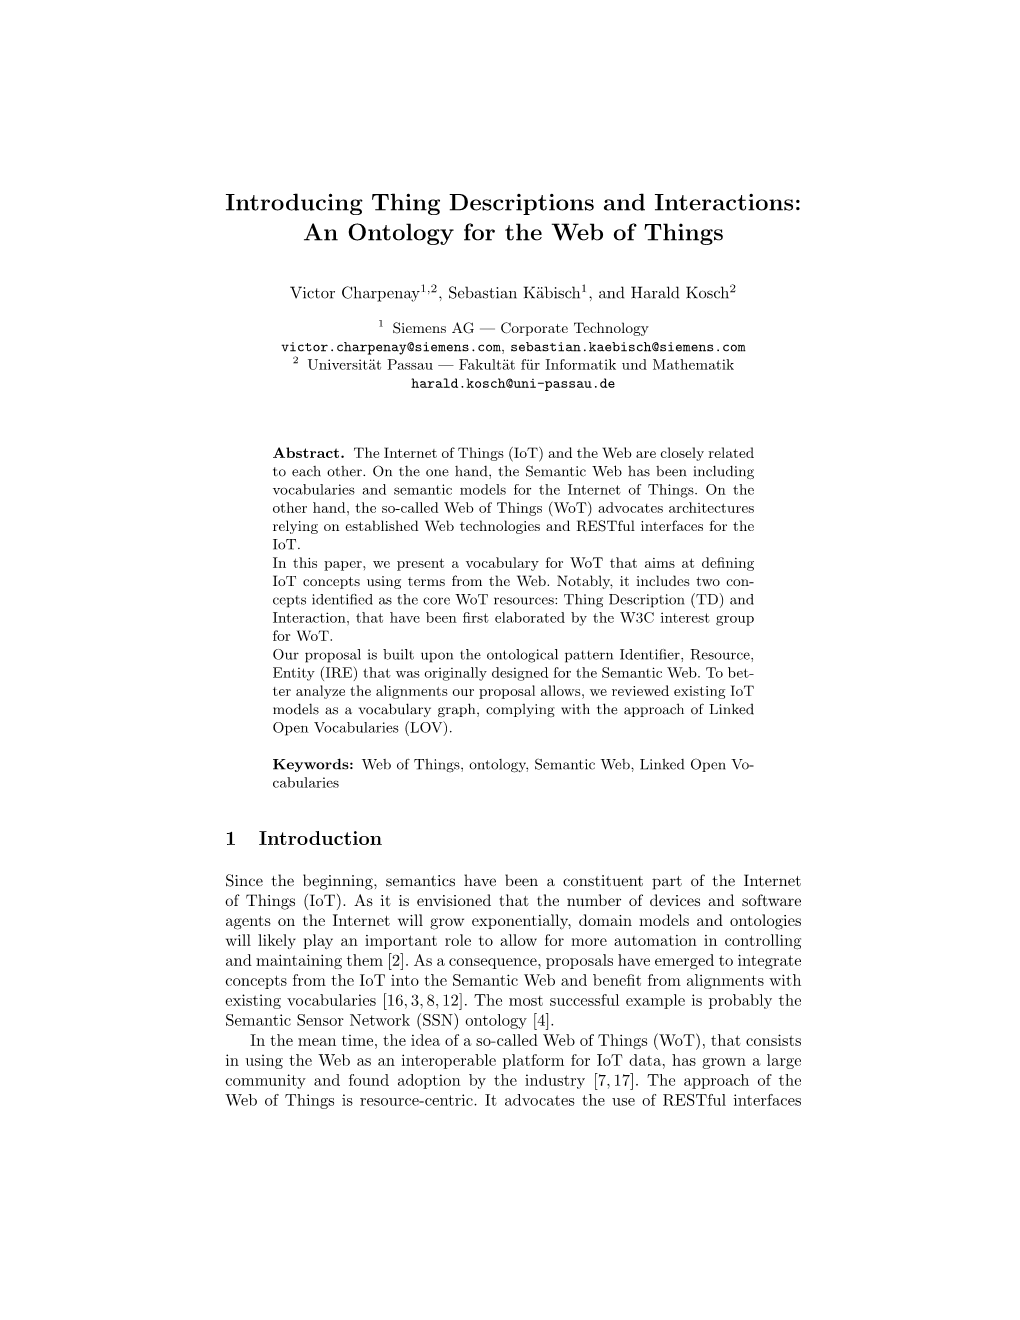 Introducing Thing Descriptions and Interactions: an Ontology for the Web of Things